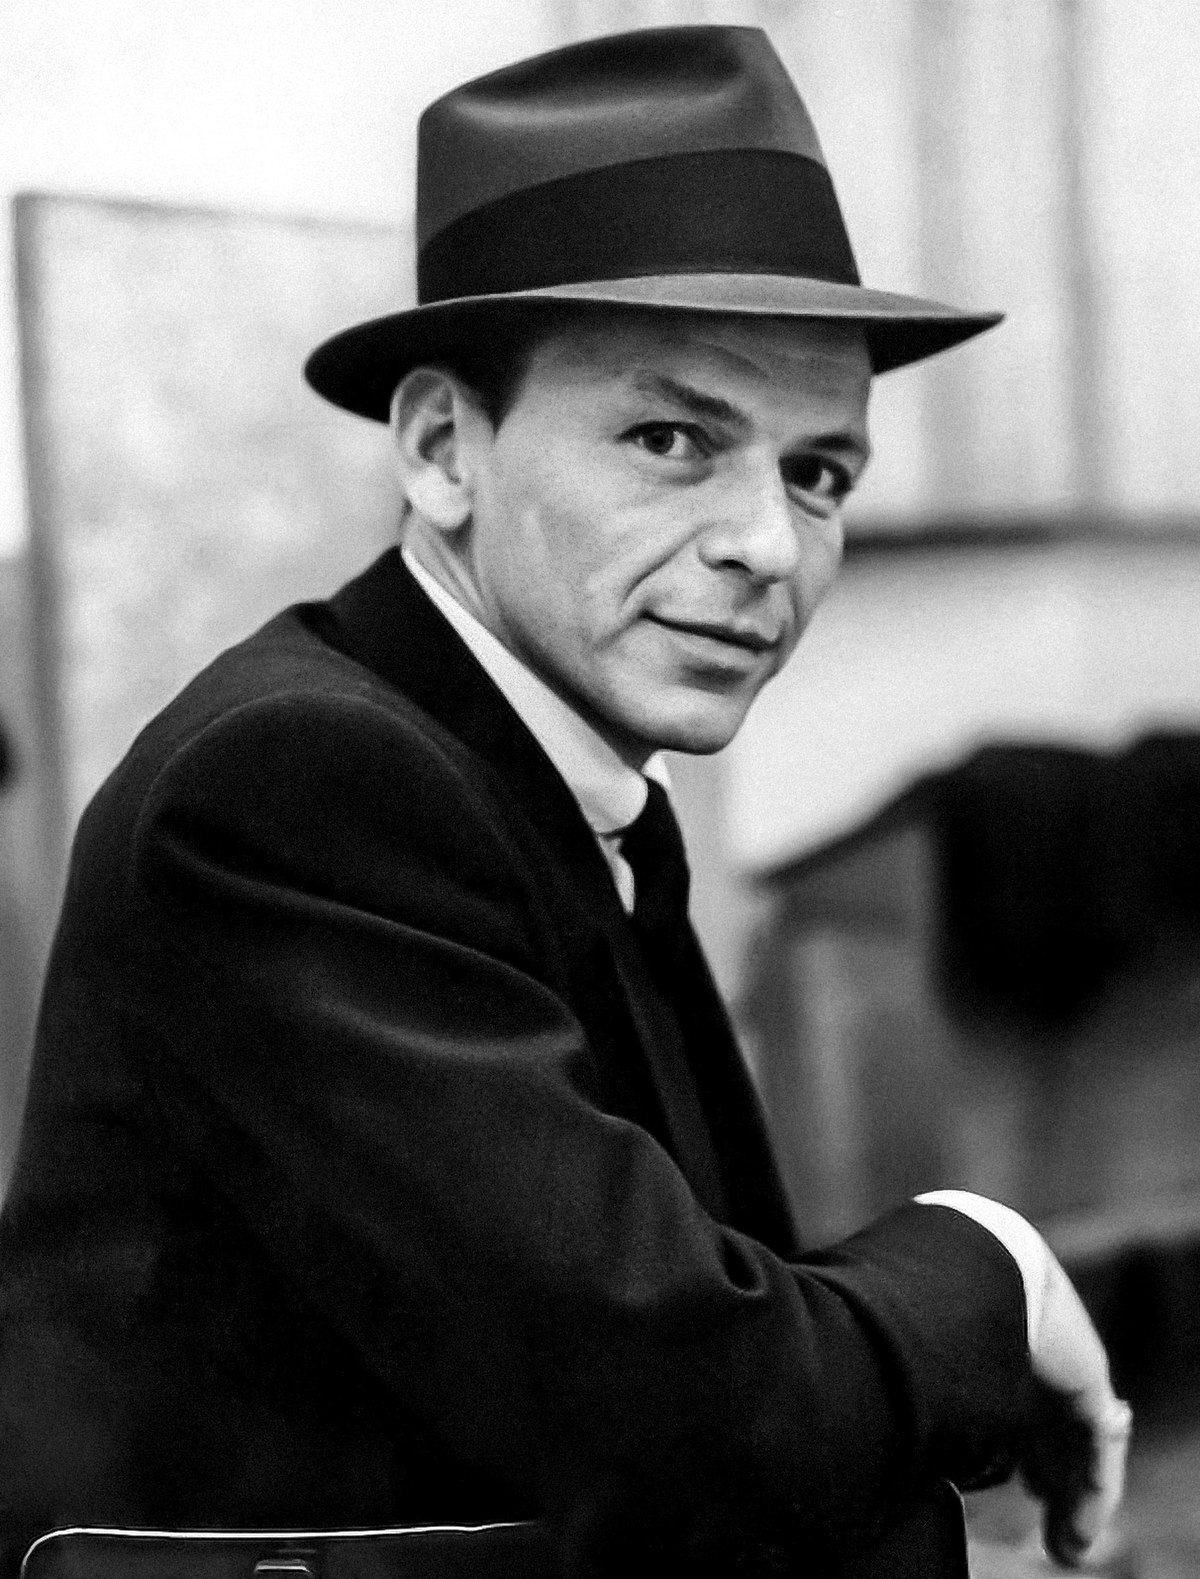 Sinatra: The Musical